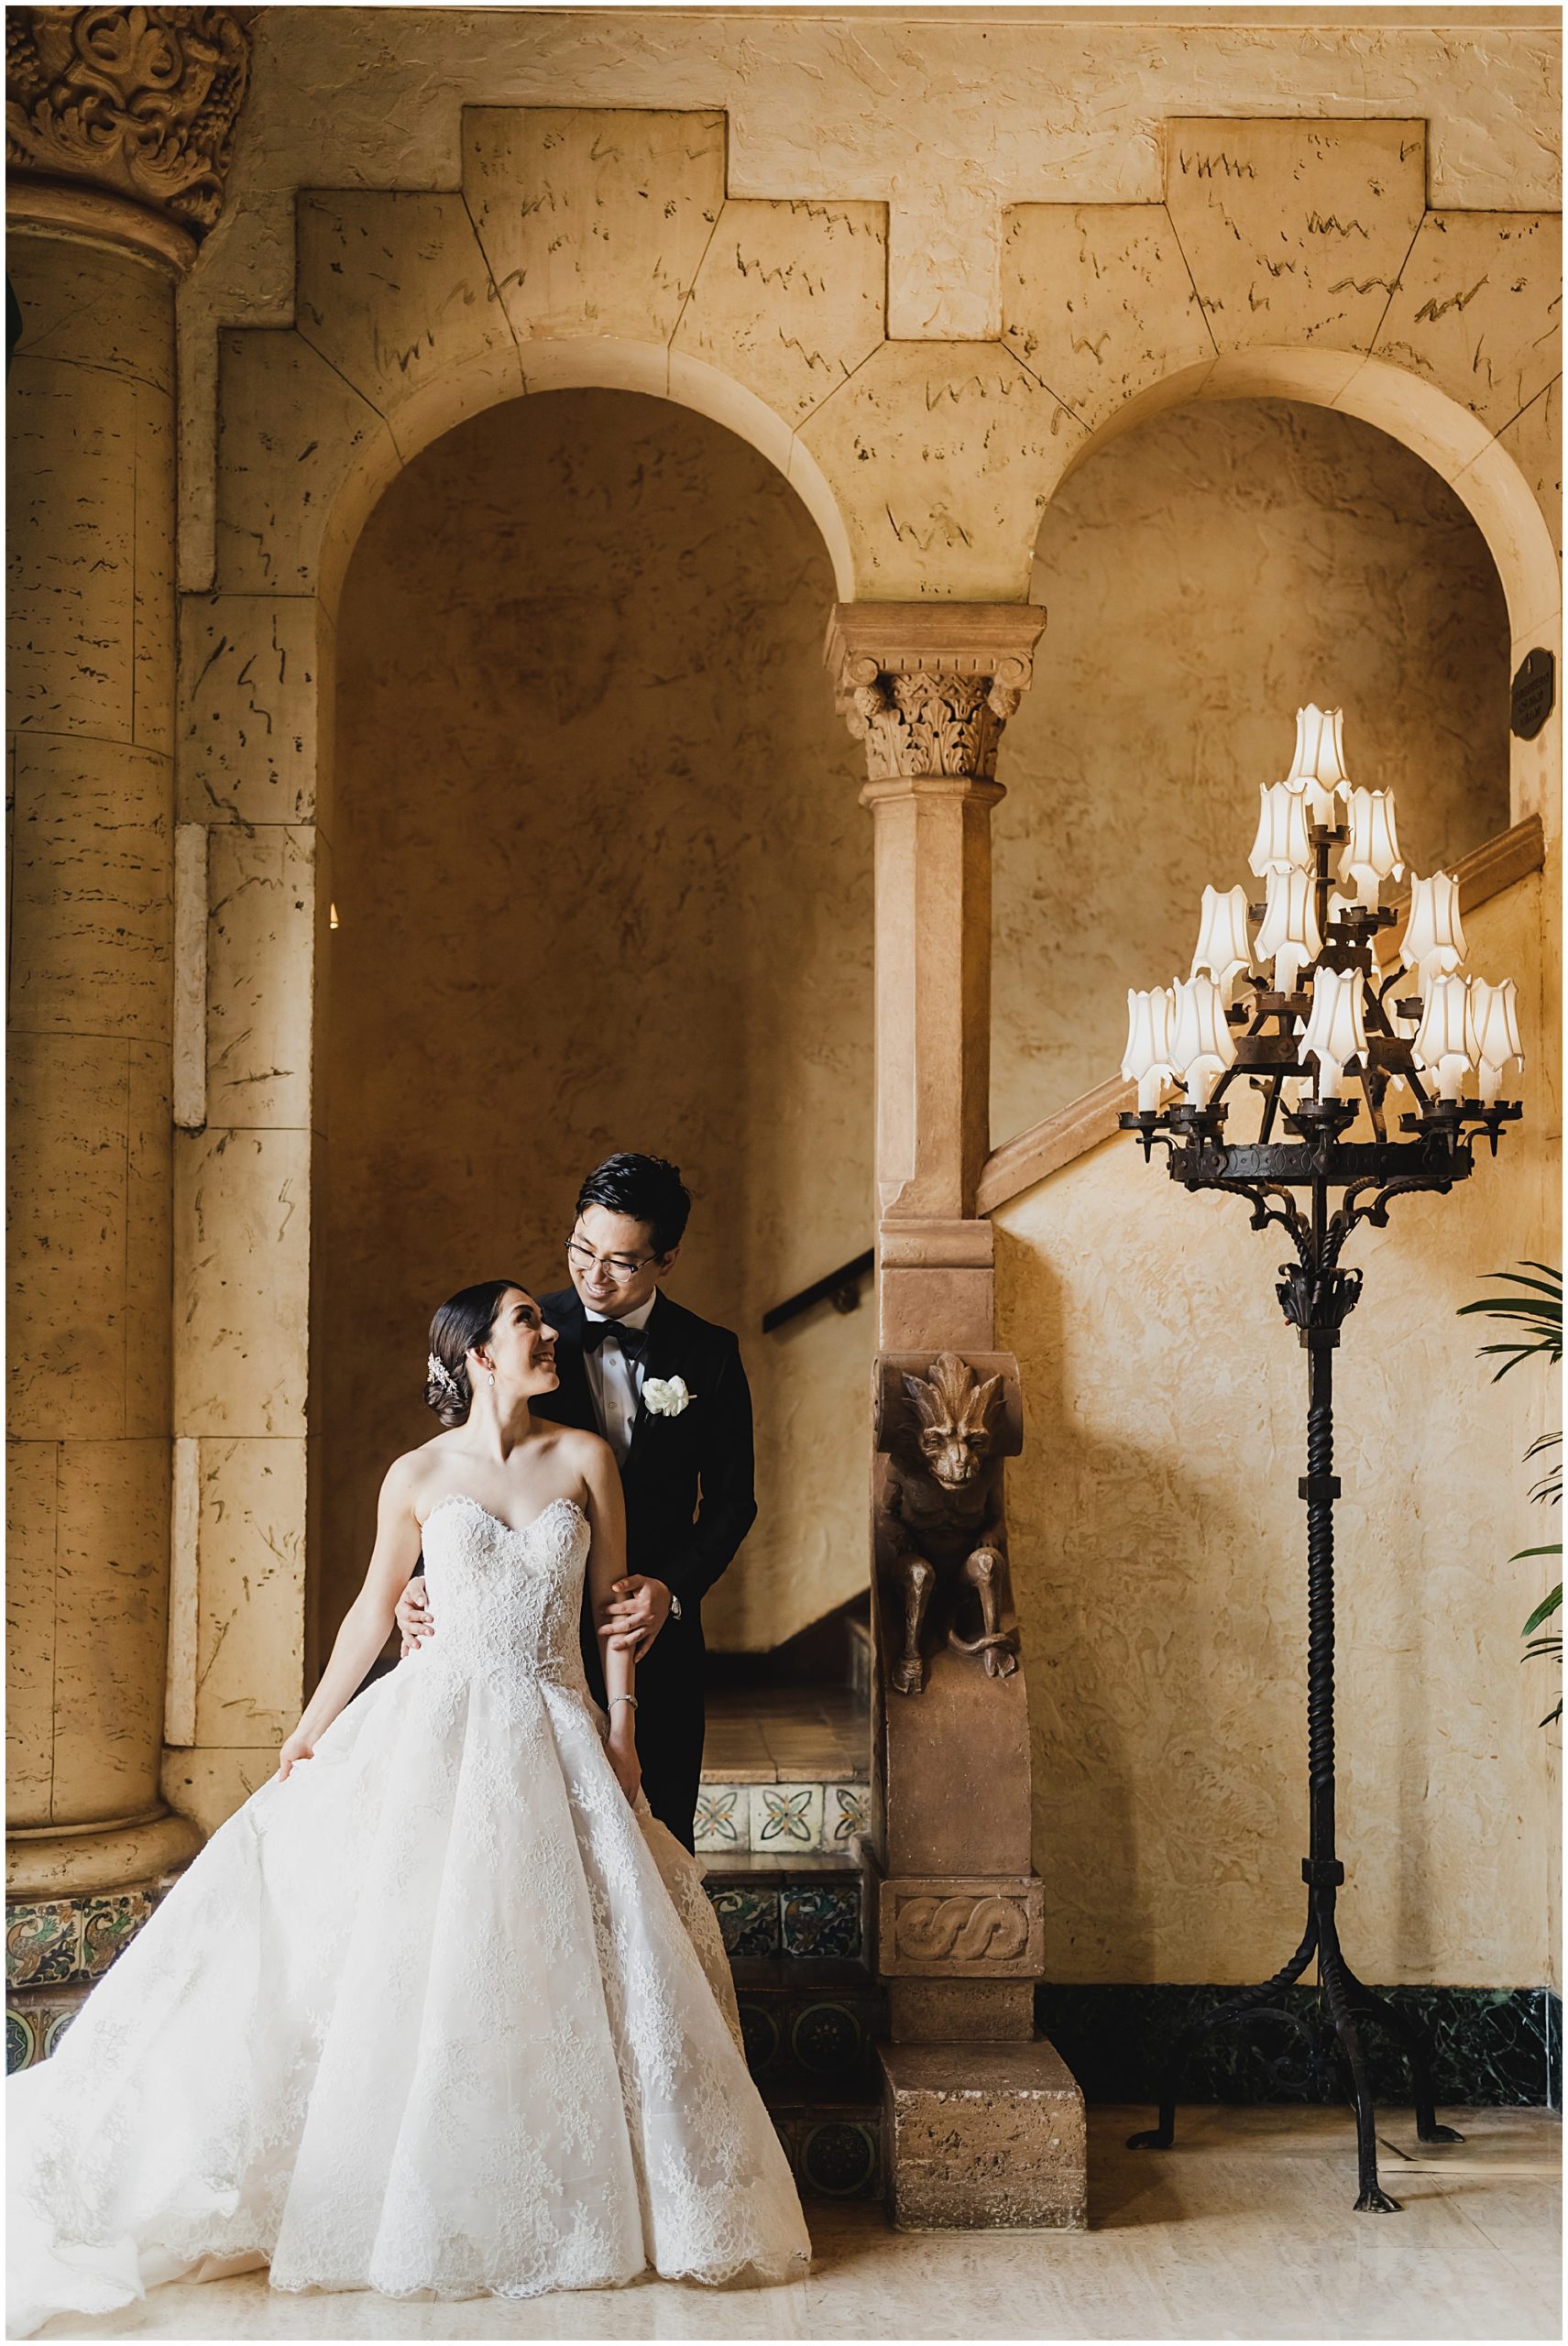 Portrait of the bride and groom in the lobby of the Biltmore Hotel in Coral gables.